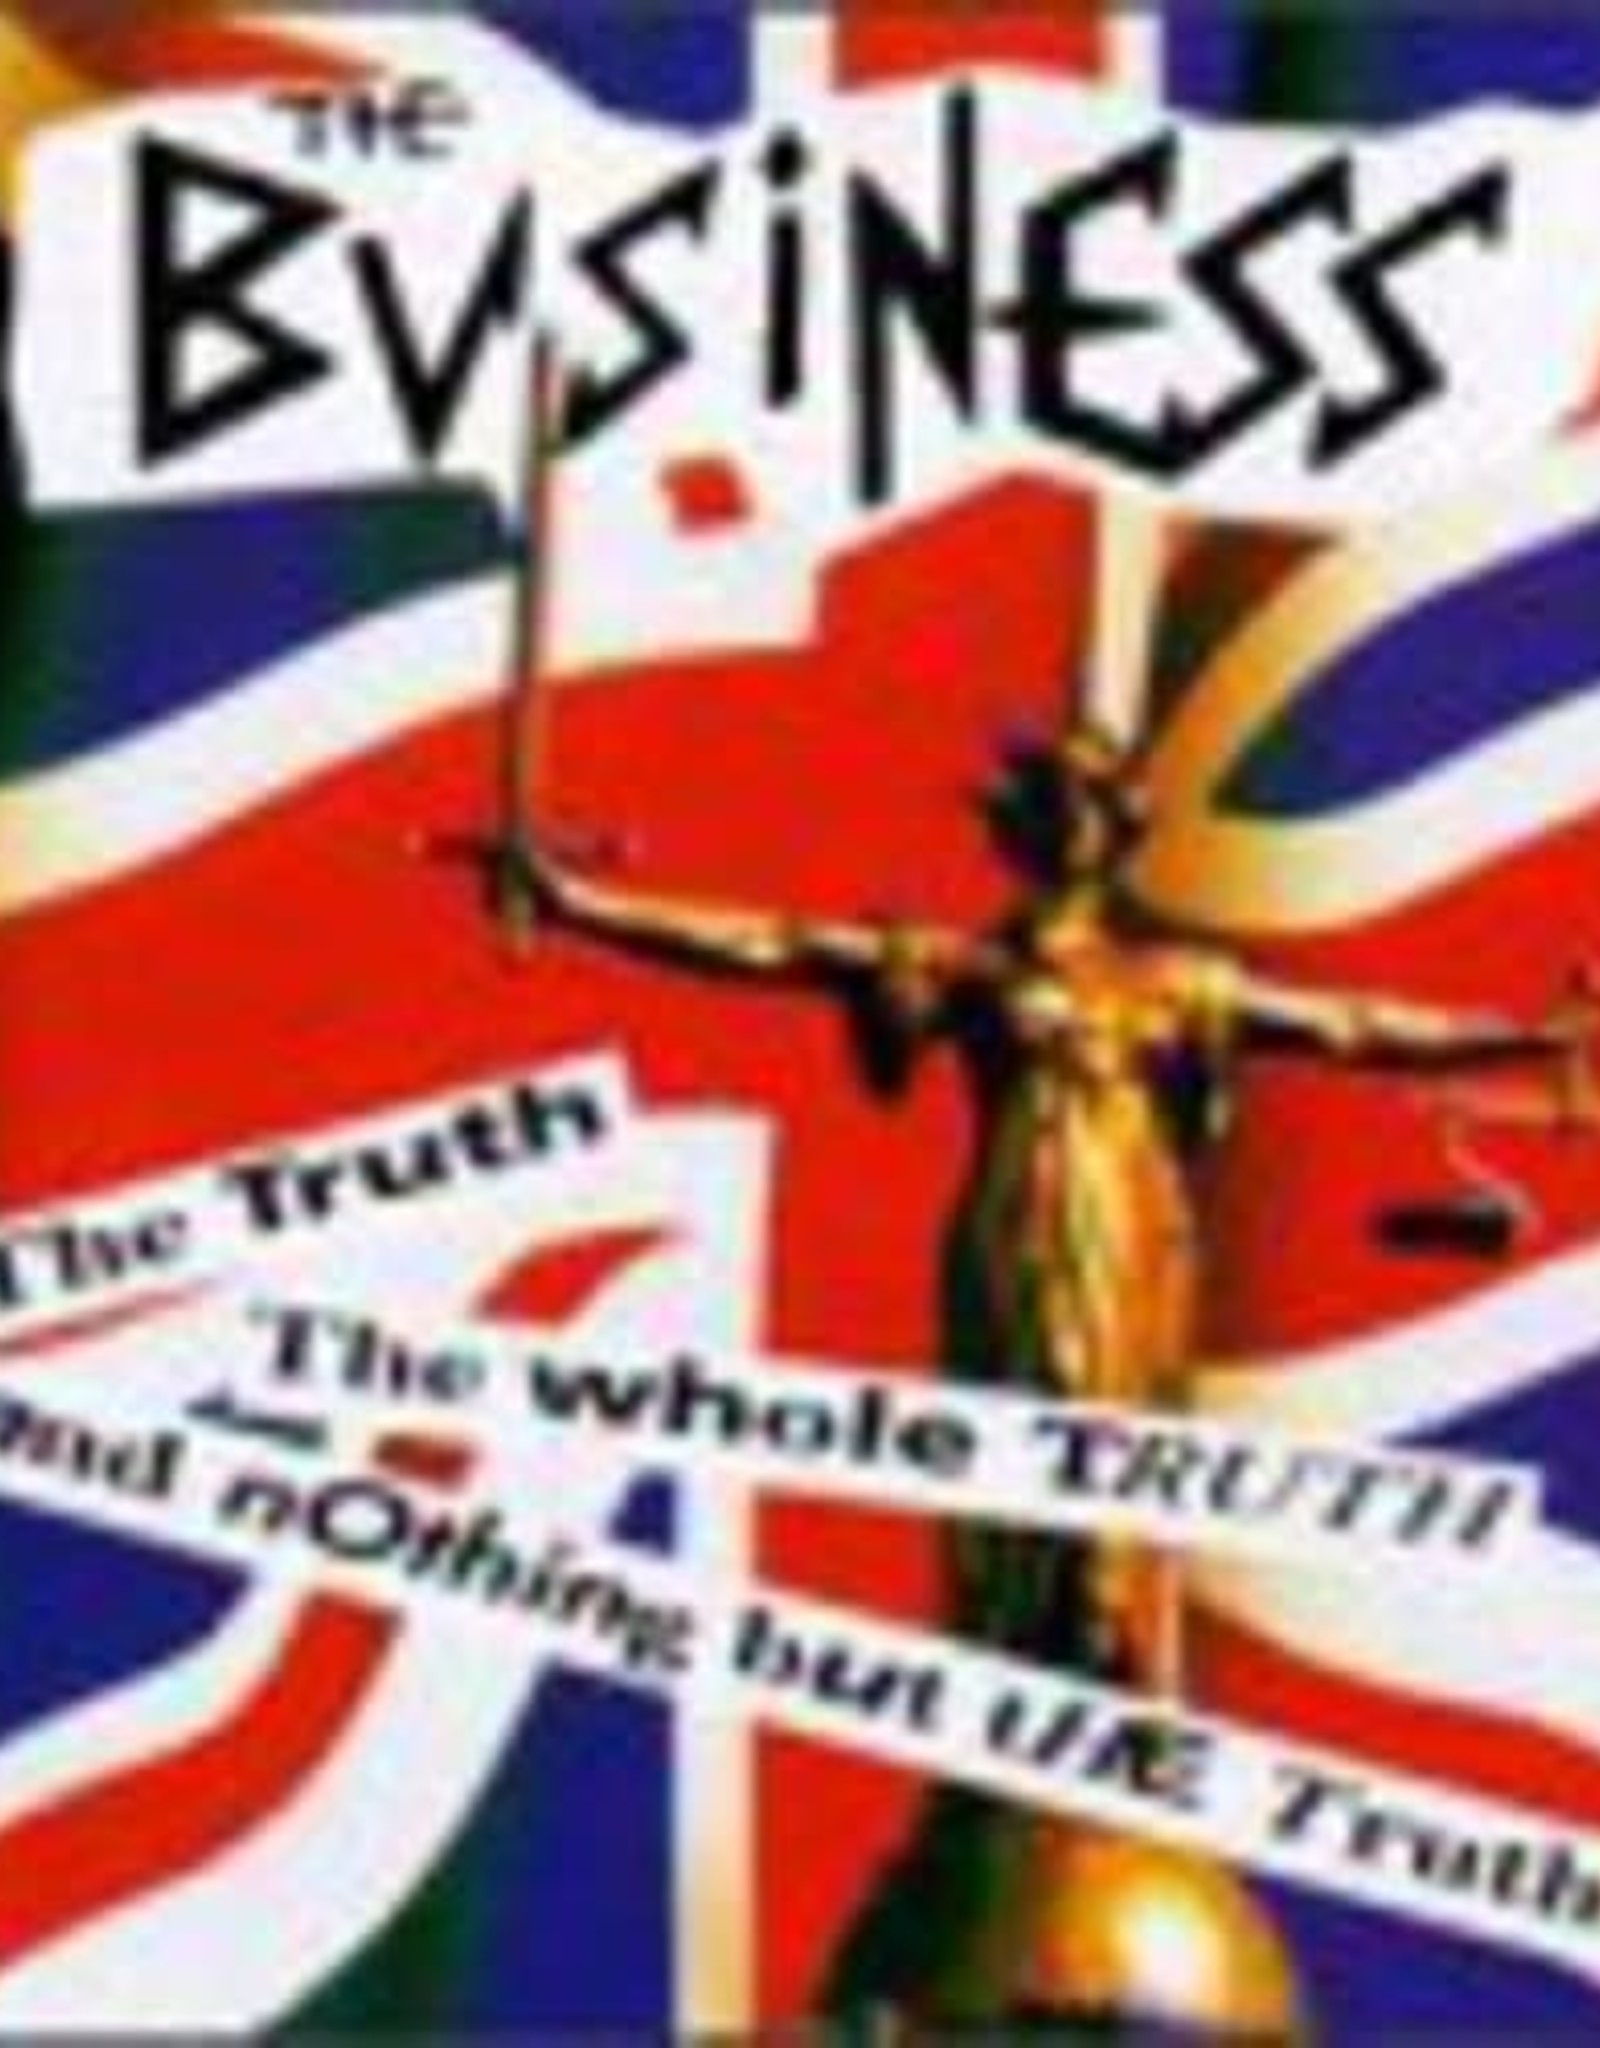 The Business - Truth the Whole Truth